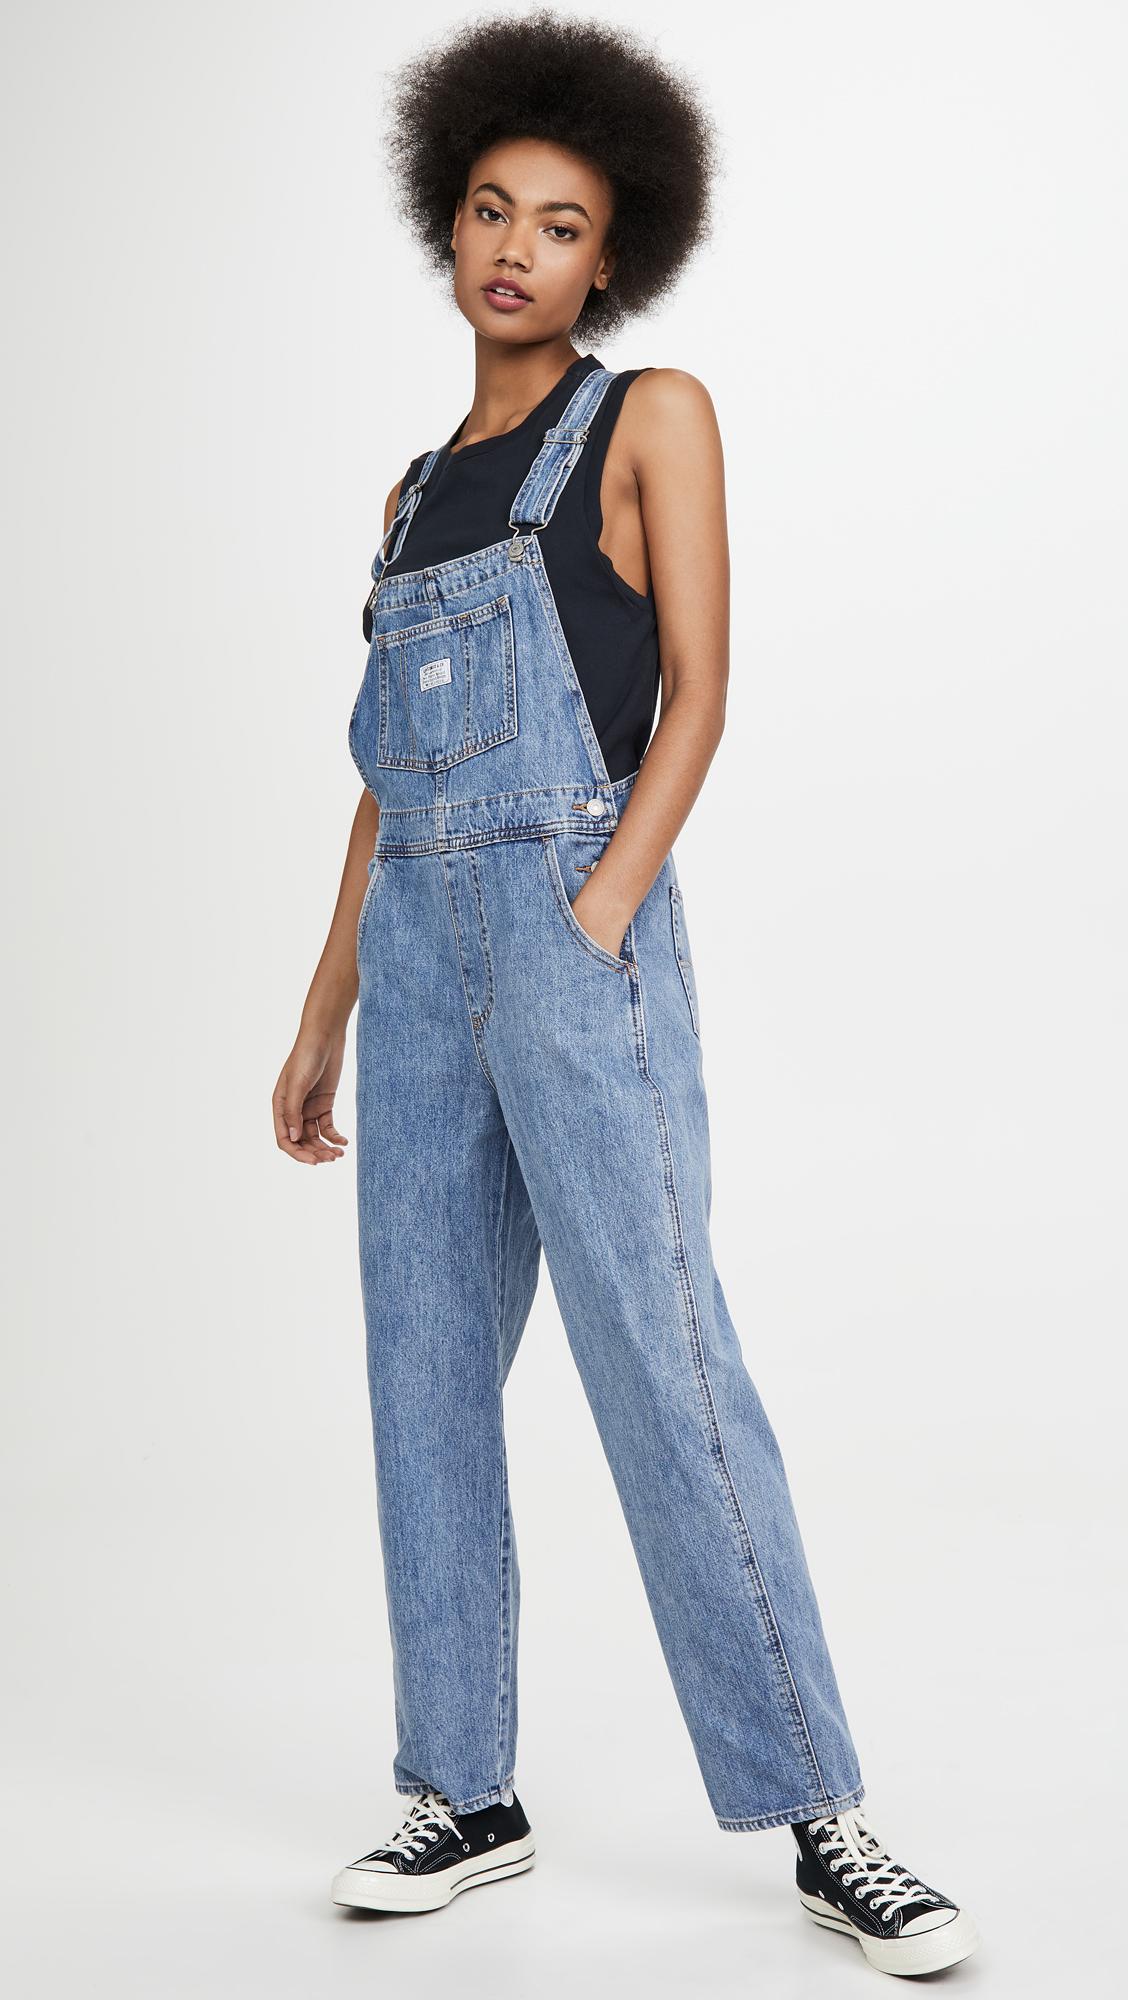 Levi's Vintage Overalls in Blue | Lyst Canada